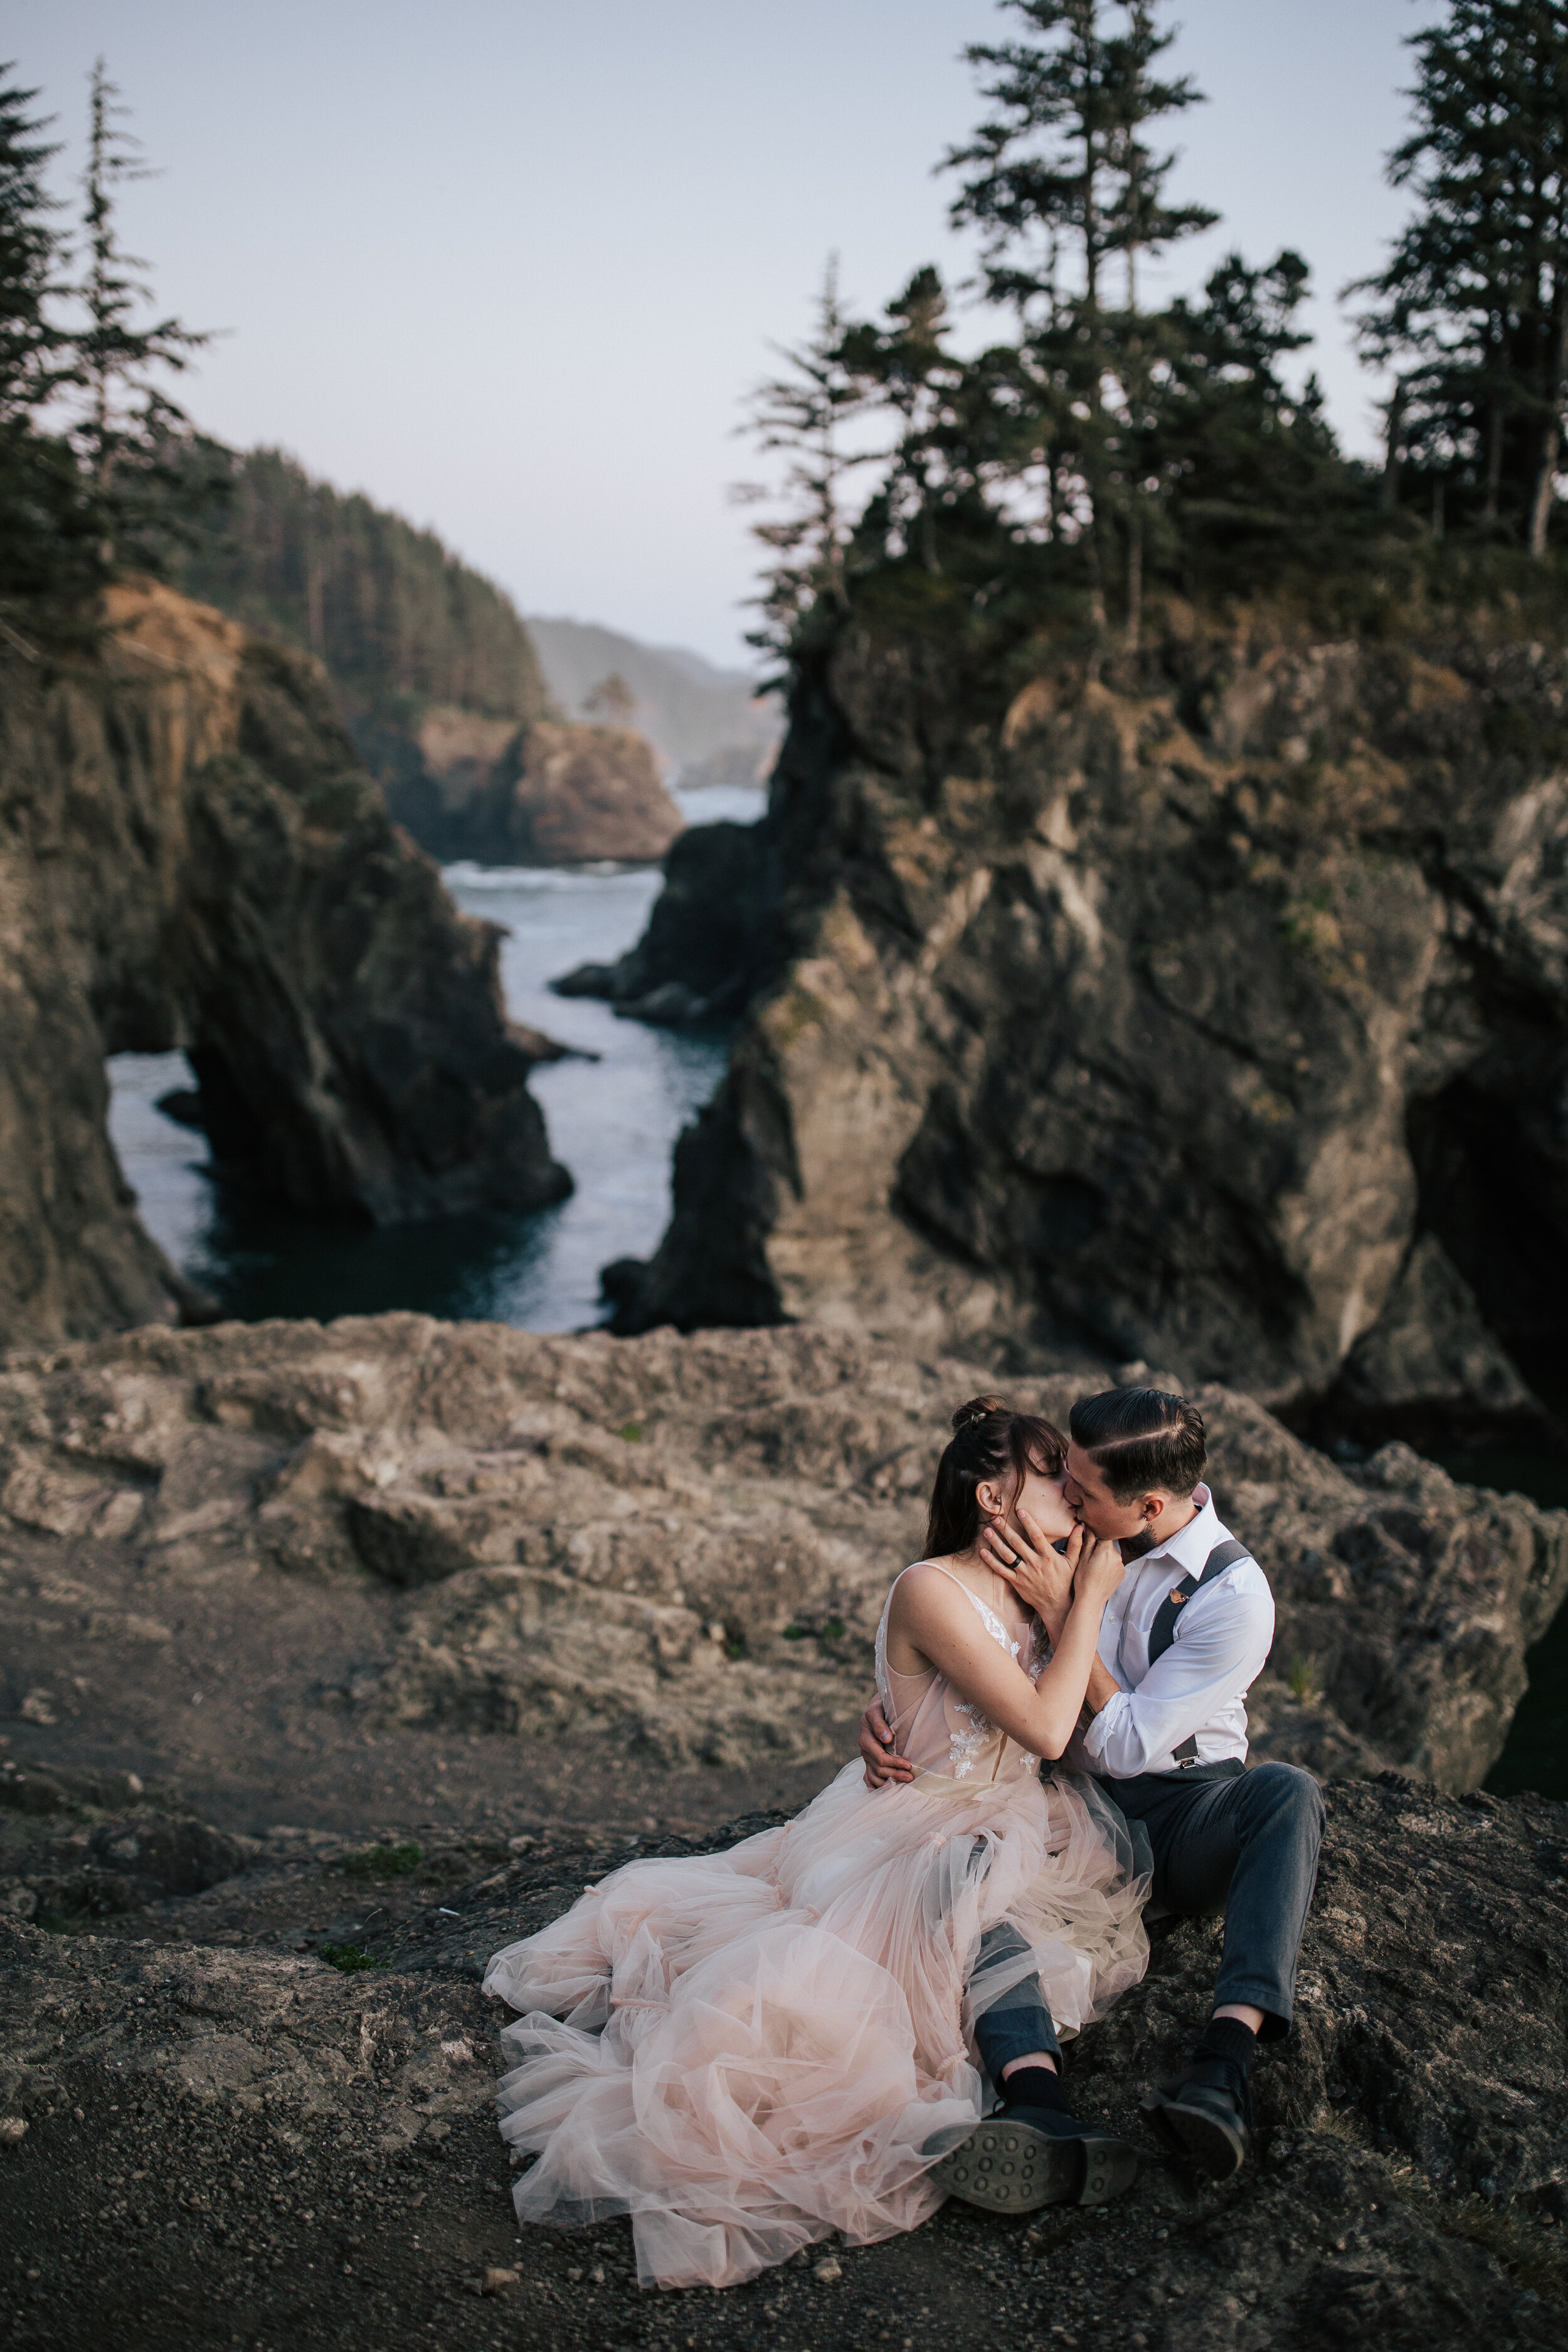  In Oregon Emily Jenkins Photography captures a woman in a blush gown and man in suspenders kissing during an elopement. blush wedding gowns suspenders for groom Oregon coast elopements elopement style #emilyjenkinsphotography #emilyjenkinselopements